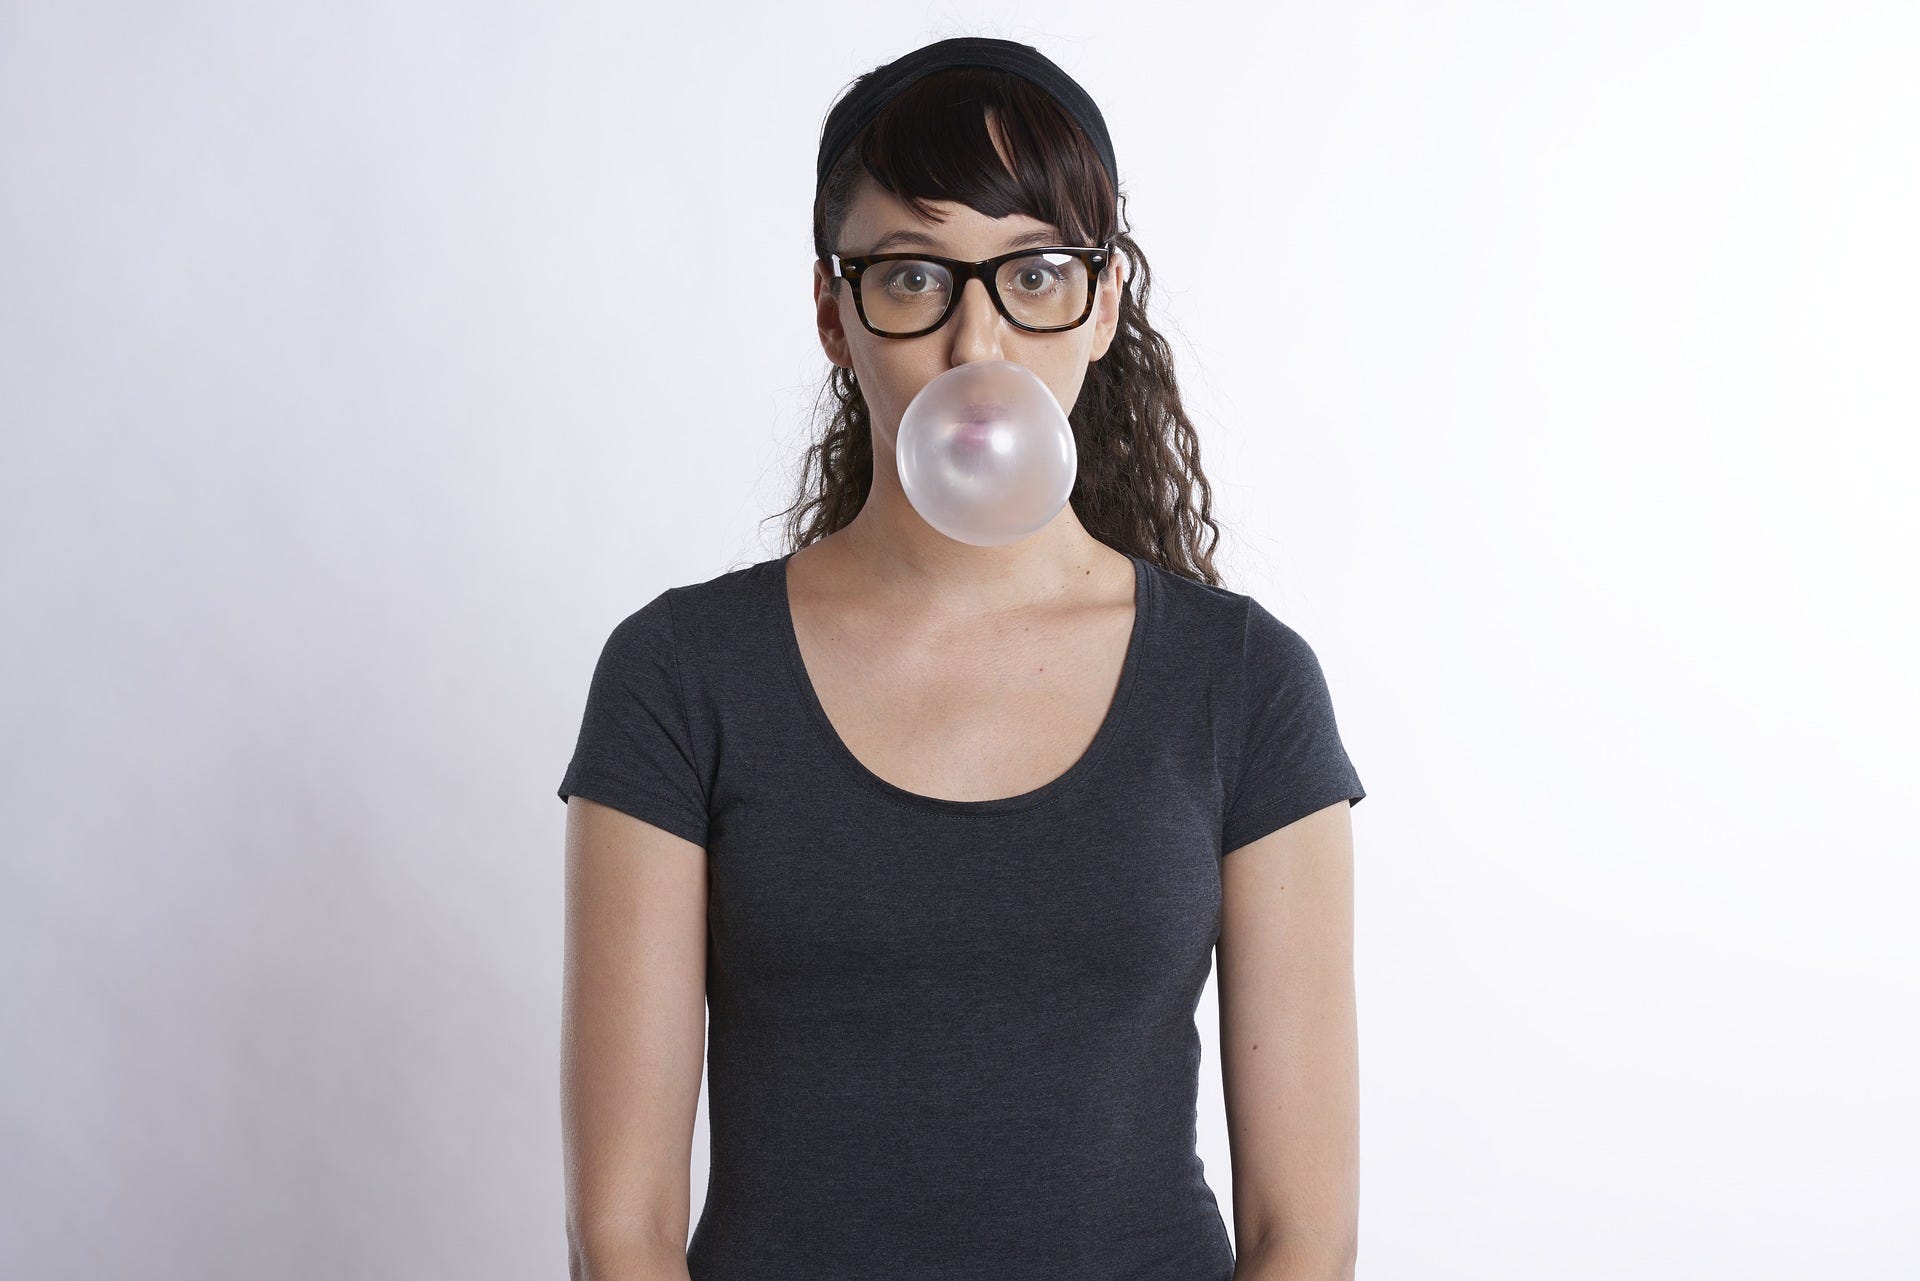 Here's how chewing gum can give you a chiseled jawline